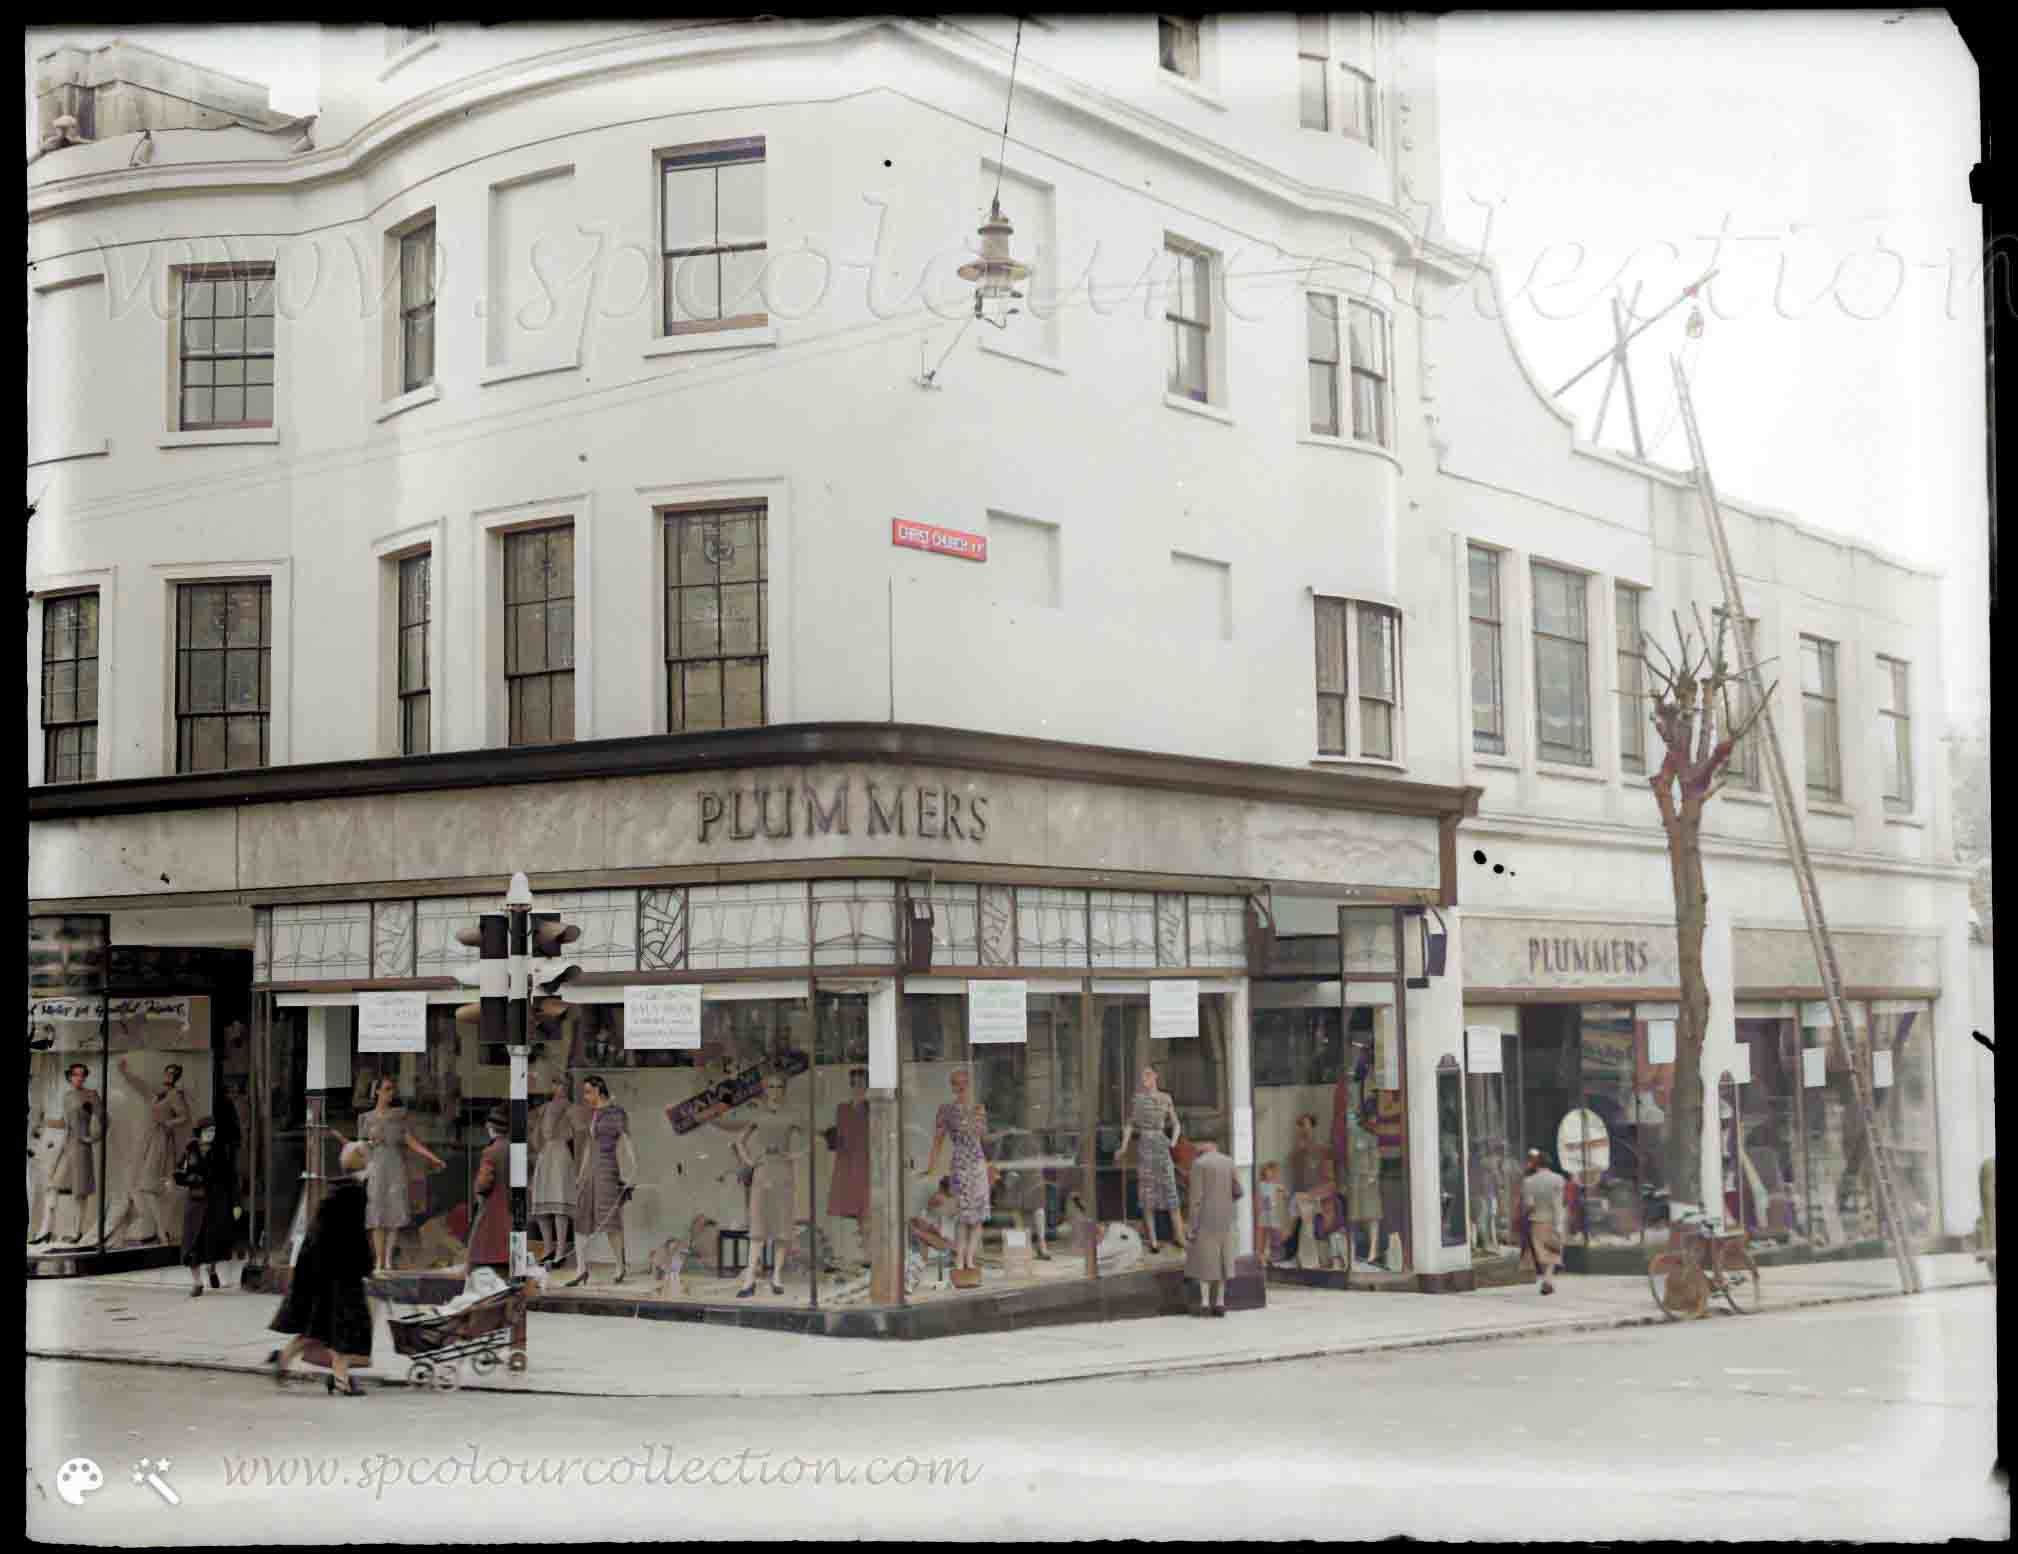 Shopping at Plummers in Brighton in around 1938